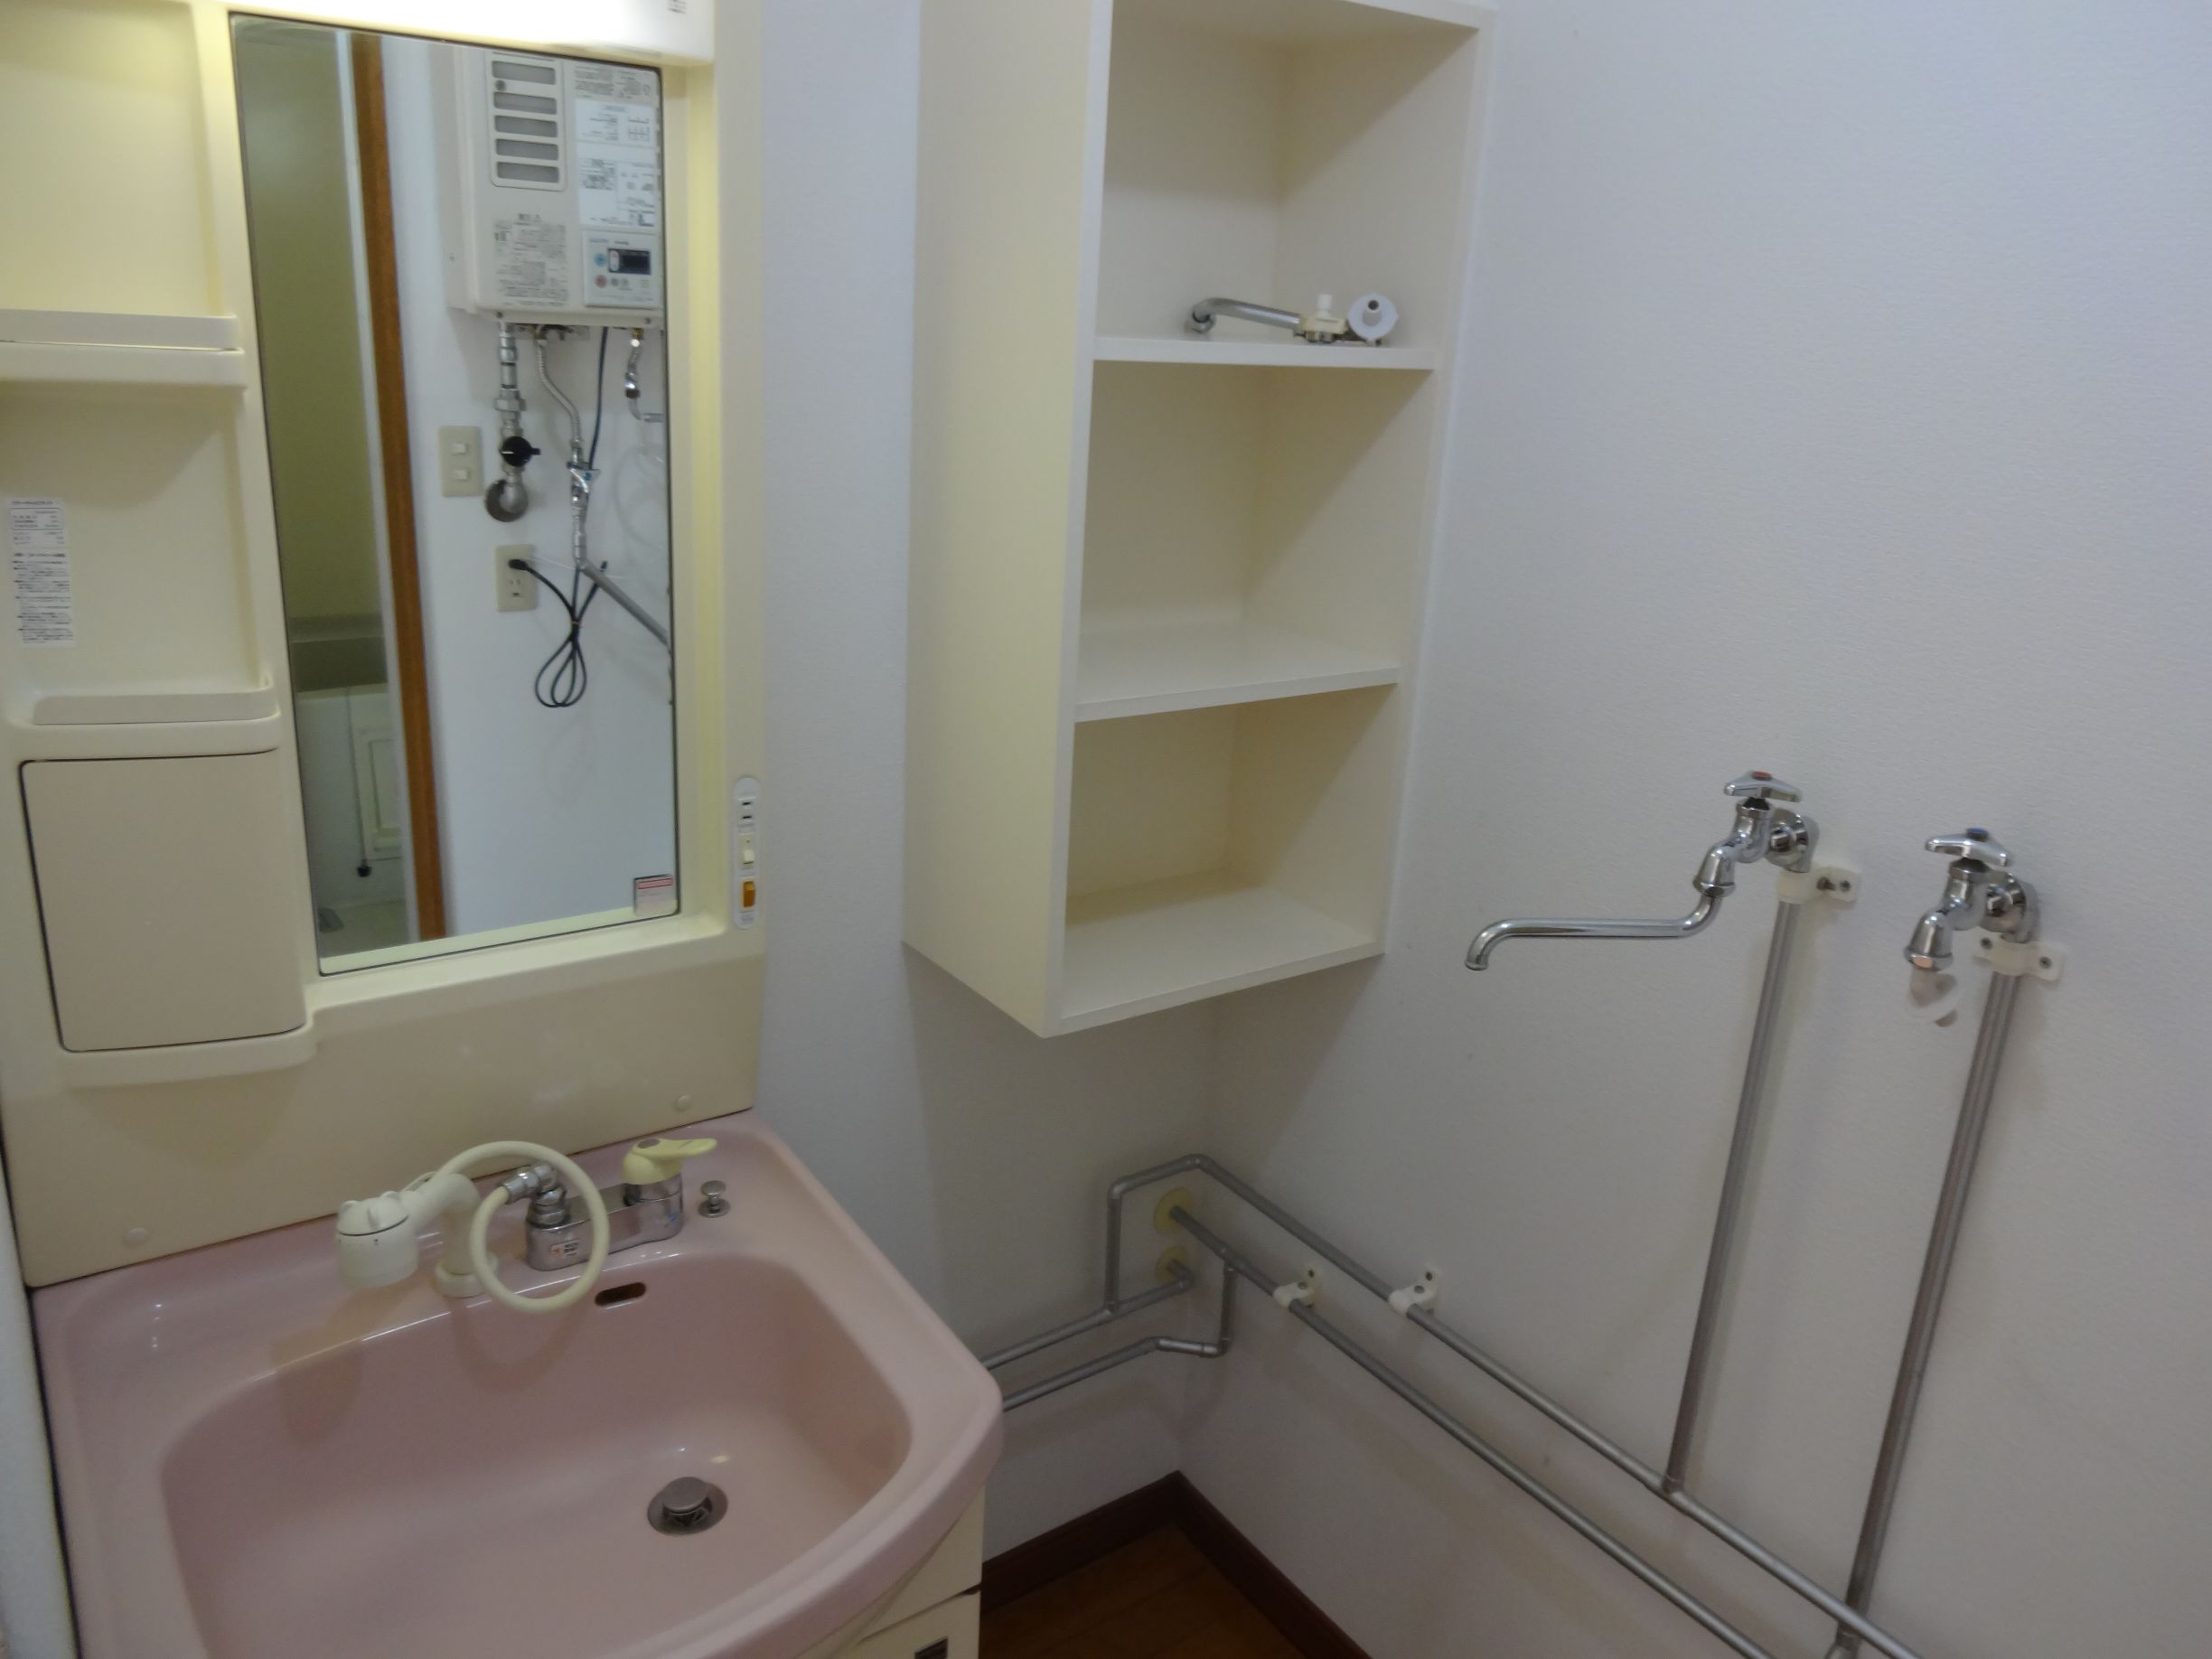 Washroom. Because there is a shelf next to the wash basin, Can you organize firm